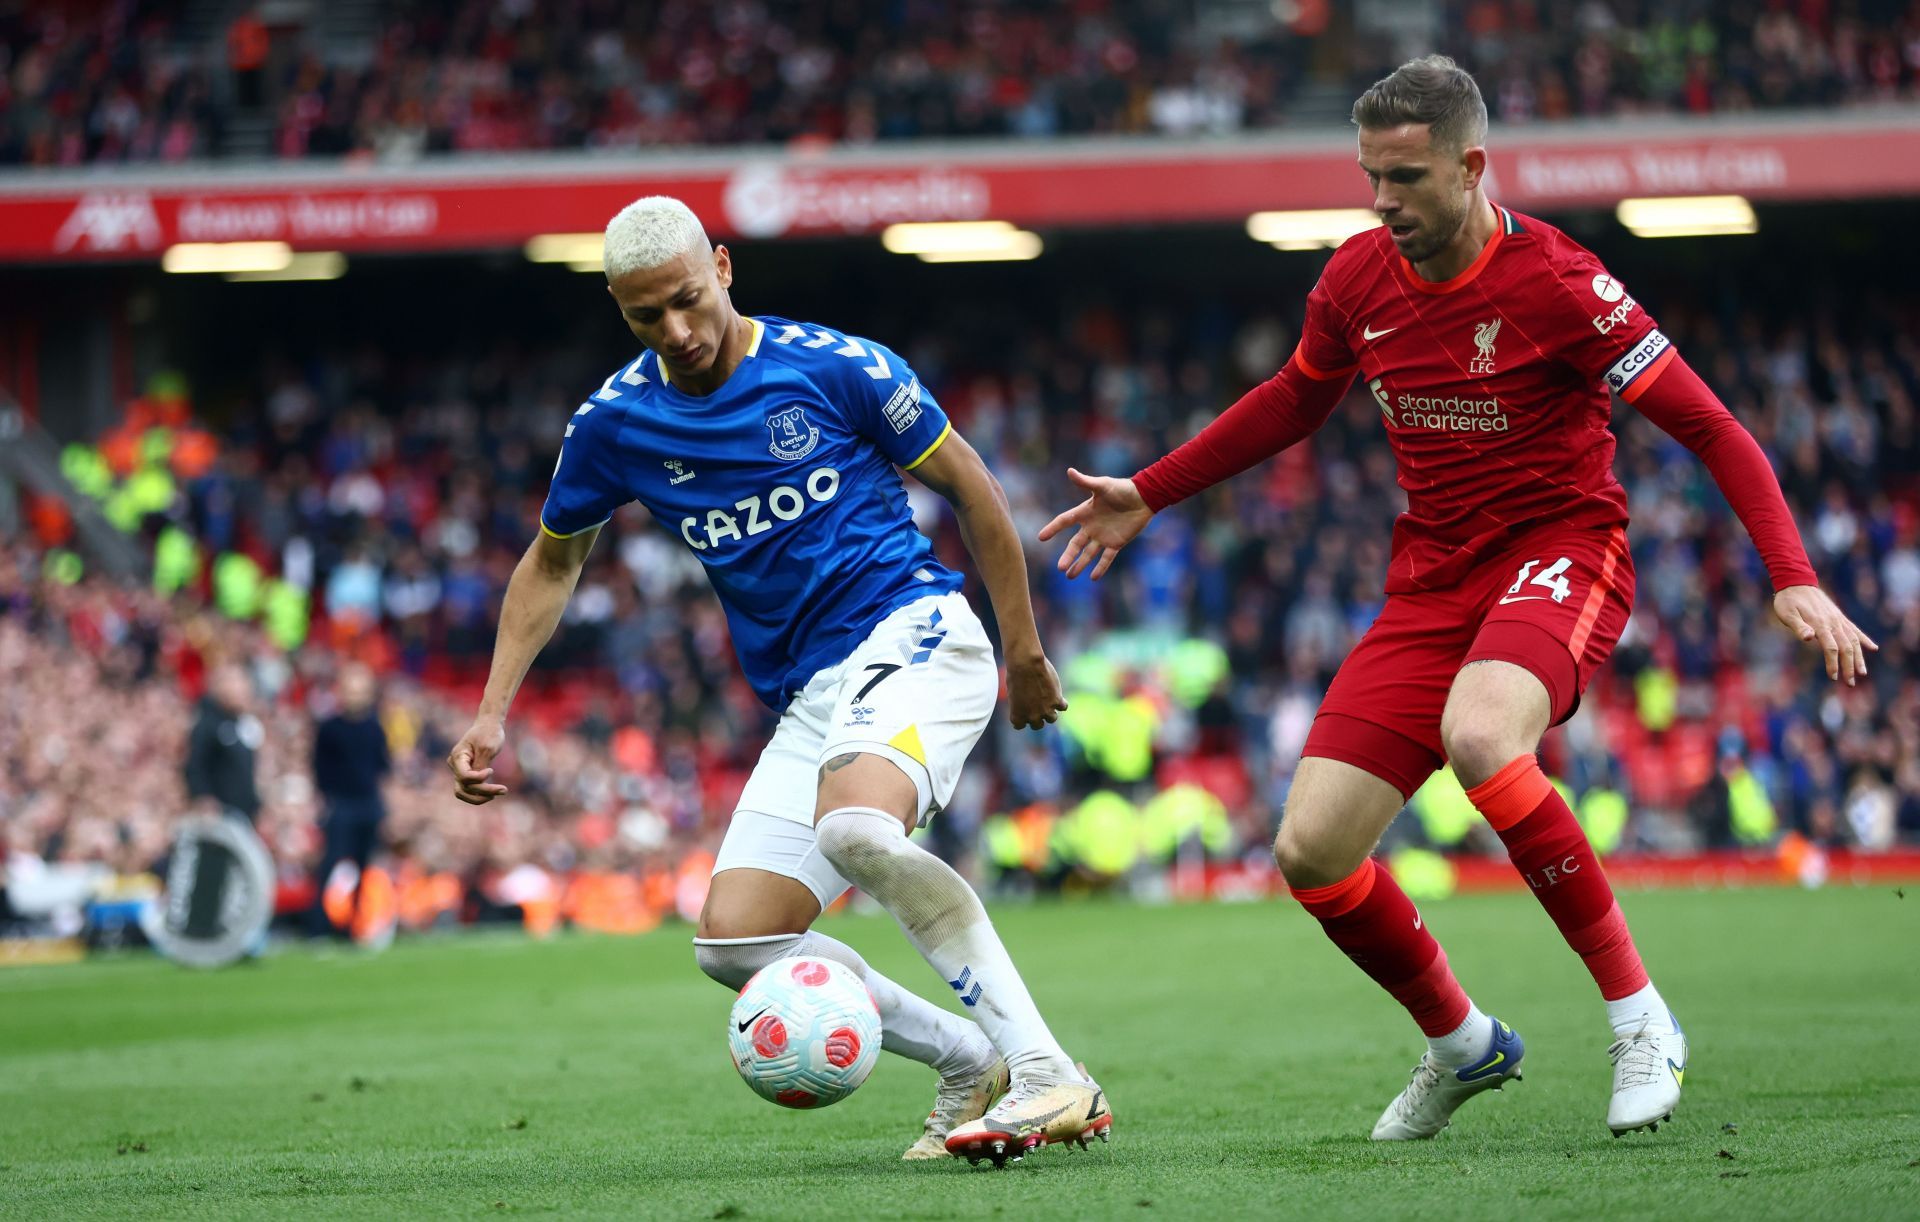 Everton showed signs of life at Anfield last weekend